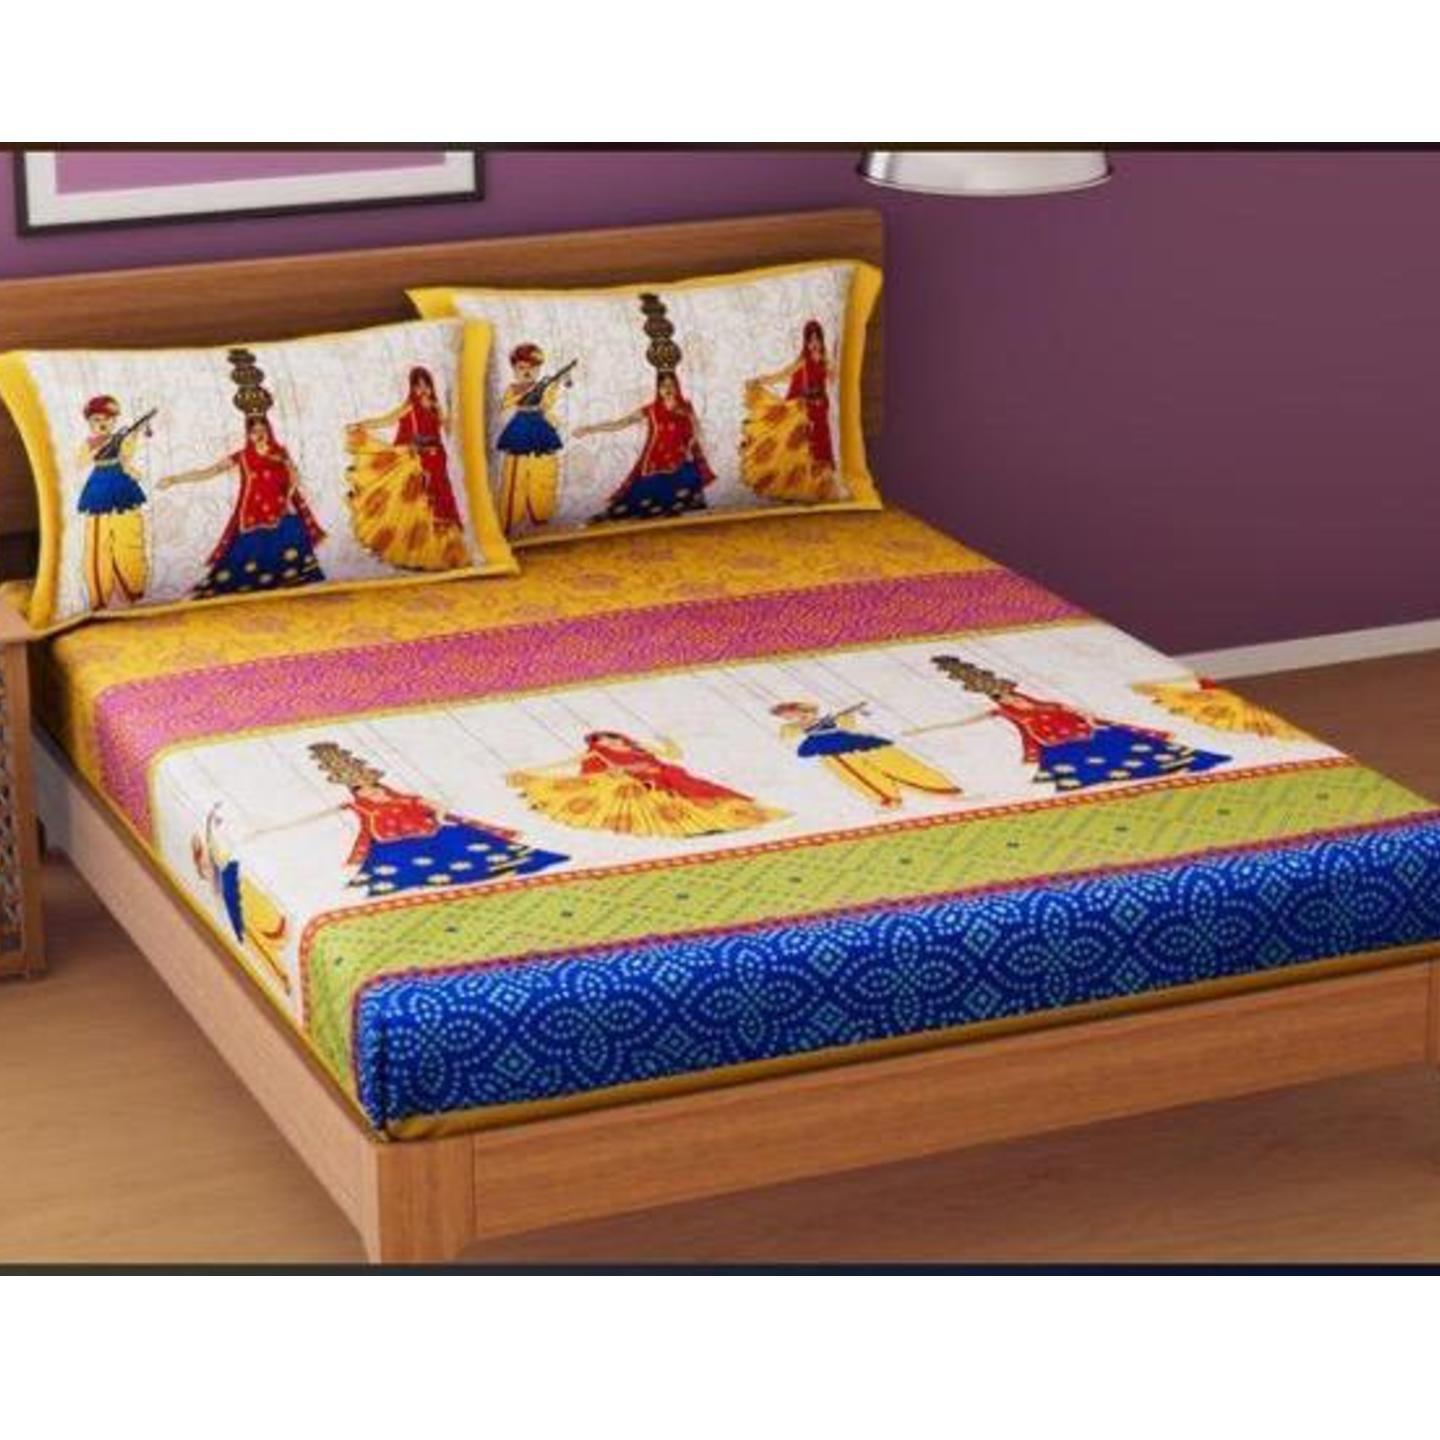 Handtex Home Cotton Rajasthani Jaipuri Traditional Printed Double Bed Bedsheet with 2 Pillow Covers